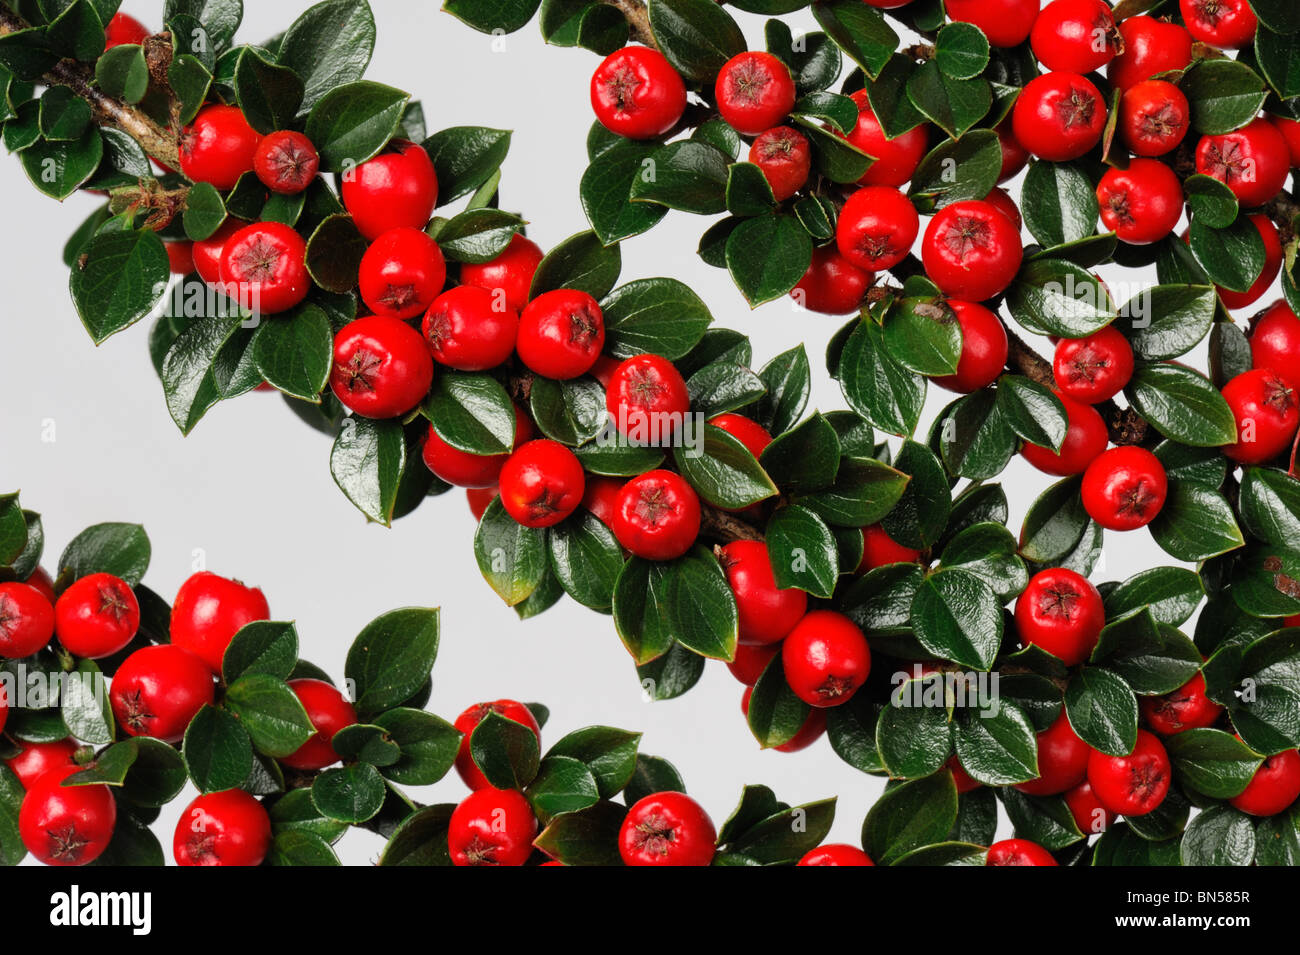 Bright red berries wioth dark green leaves on Cotoneaster horizontalis against a white background Stock Photo